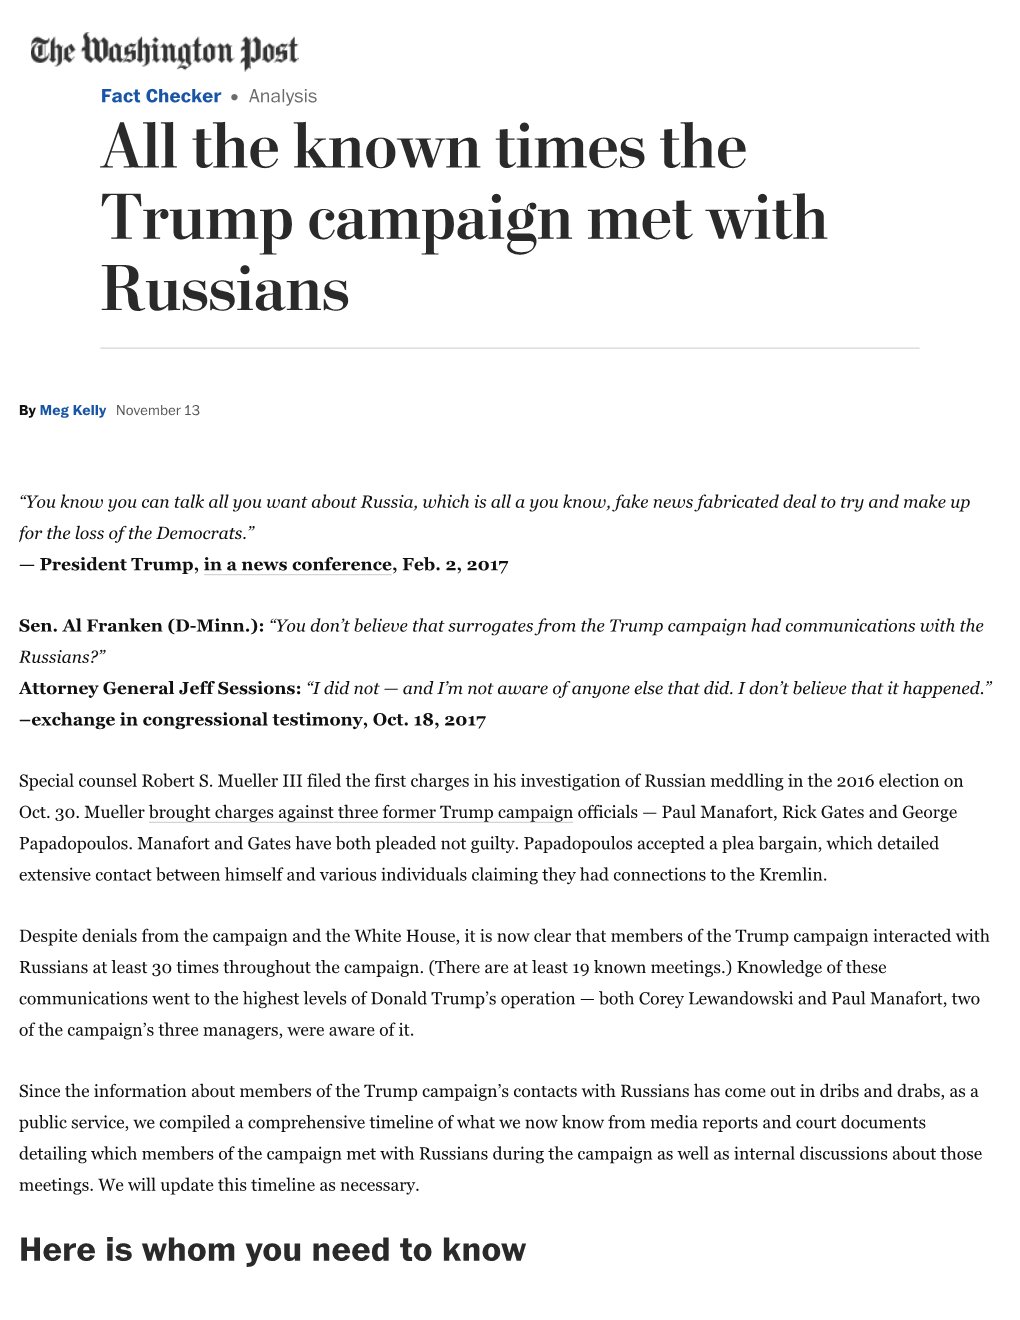 All the Known Times the Trump Campaign Met with Russians